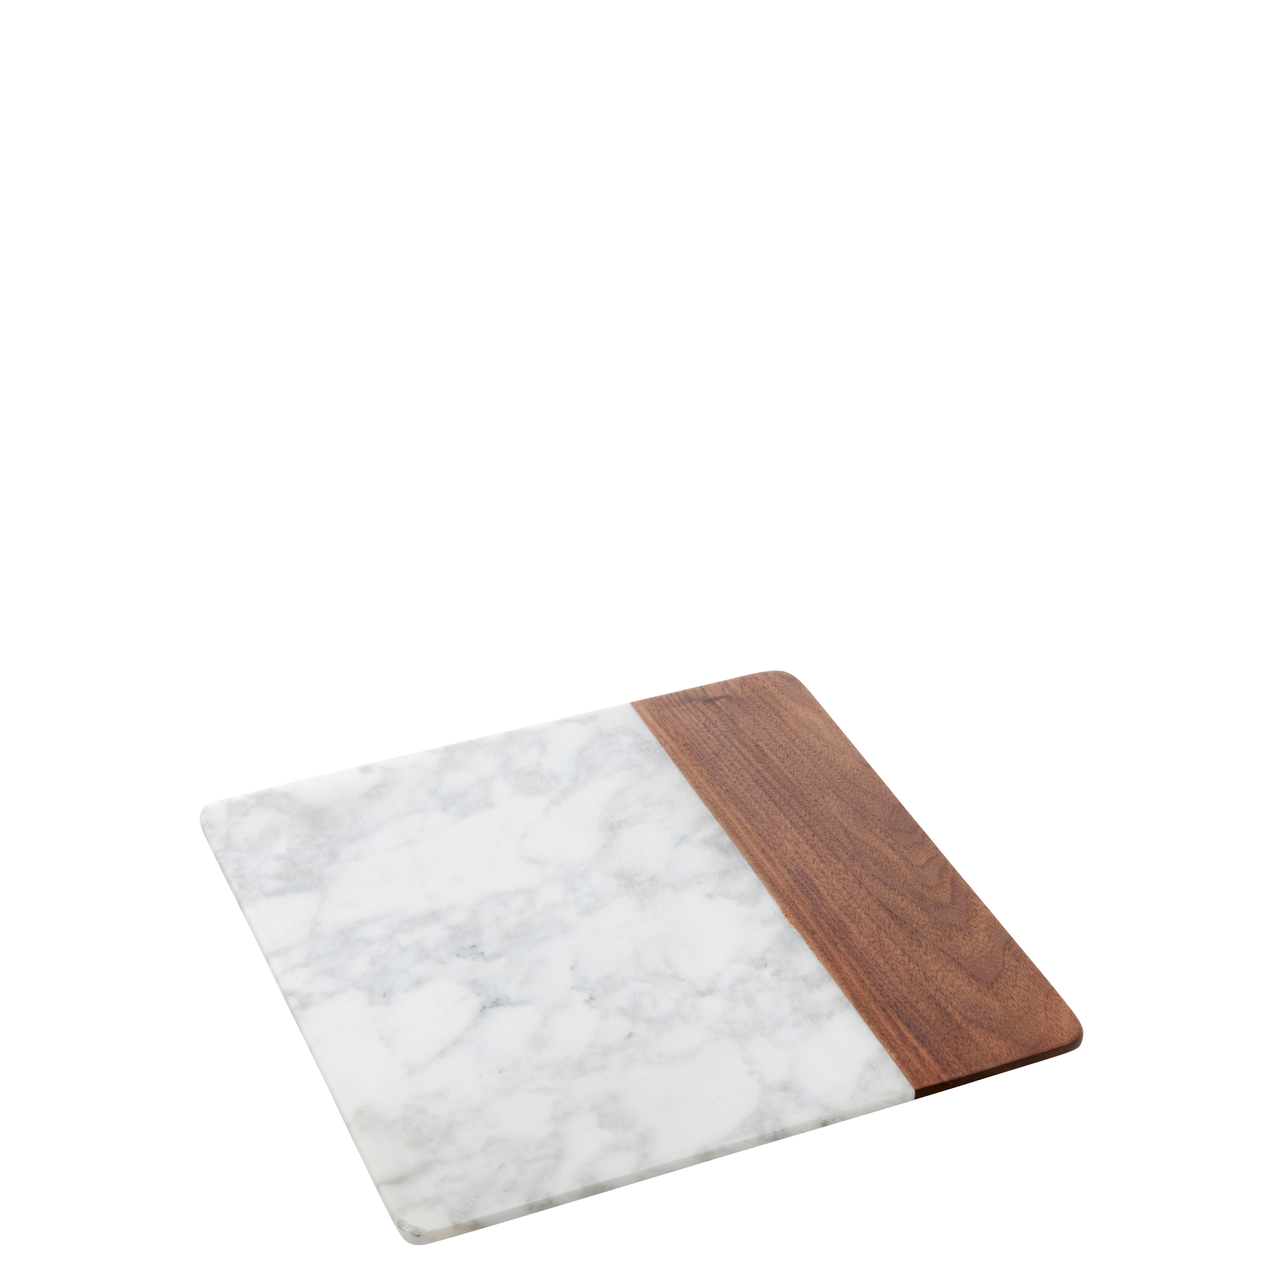 Board marble/wood square 25,4x25,4x1,5cm